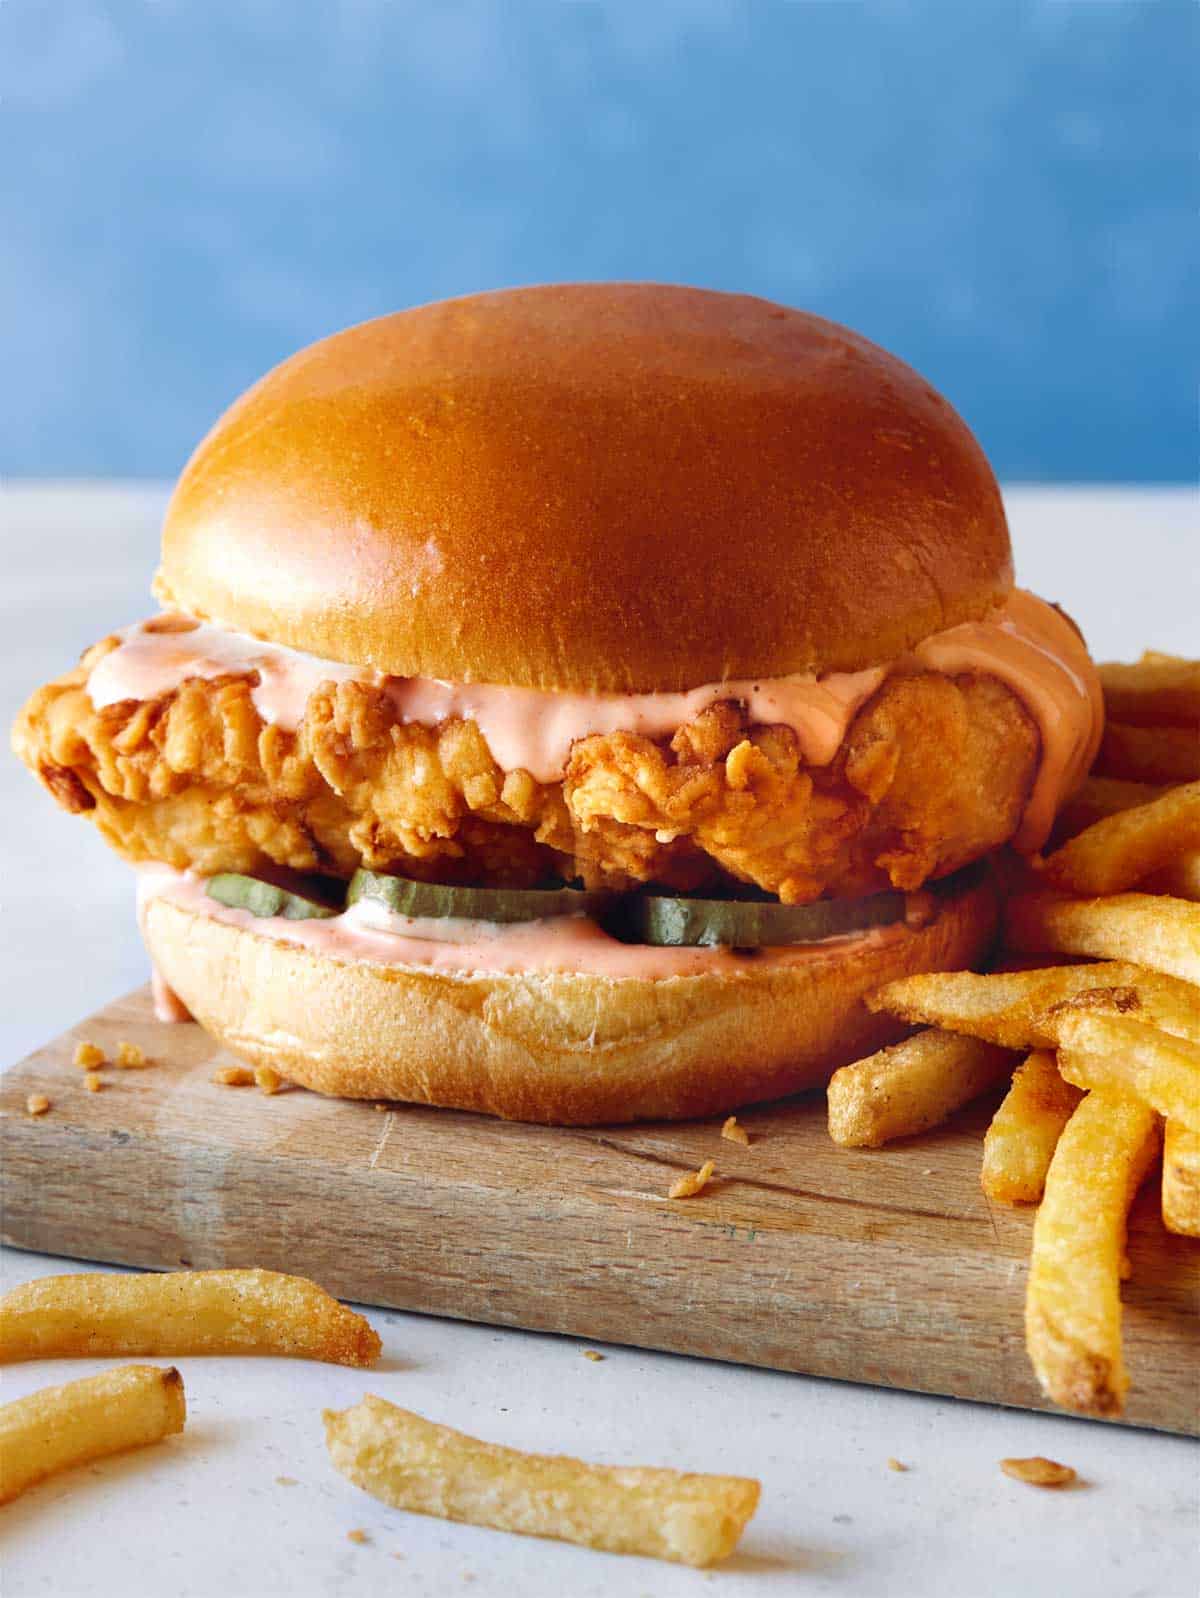 Popeyes fried chicken sandwich on a cutting board with french fries.